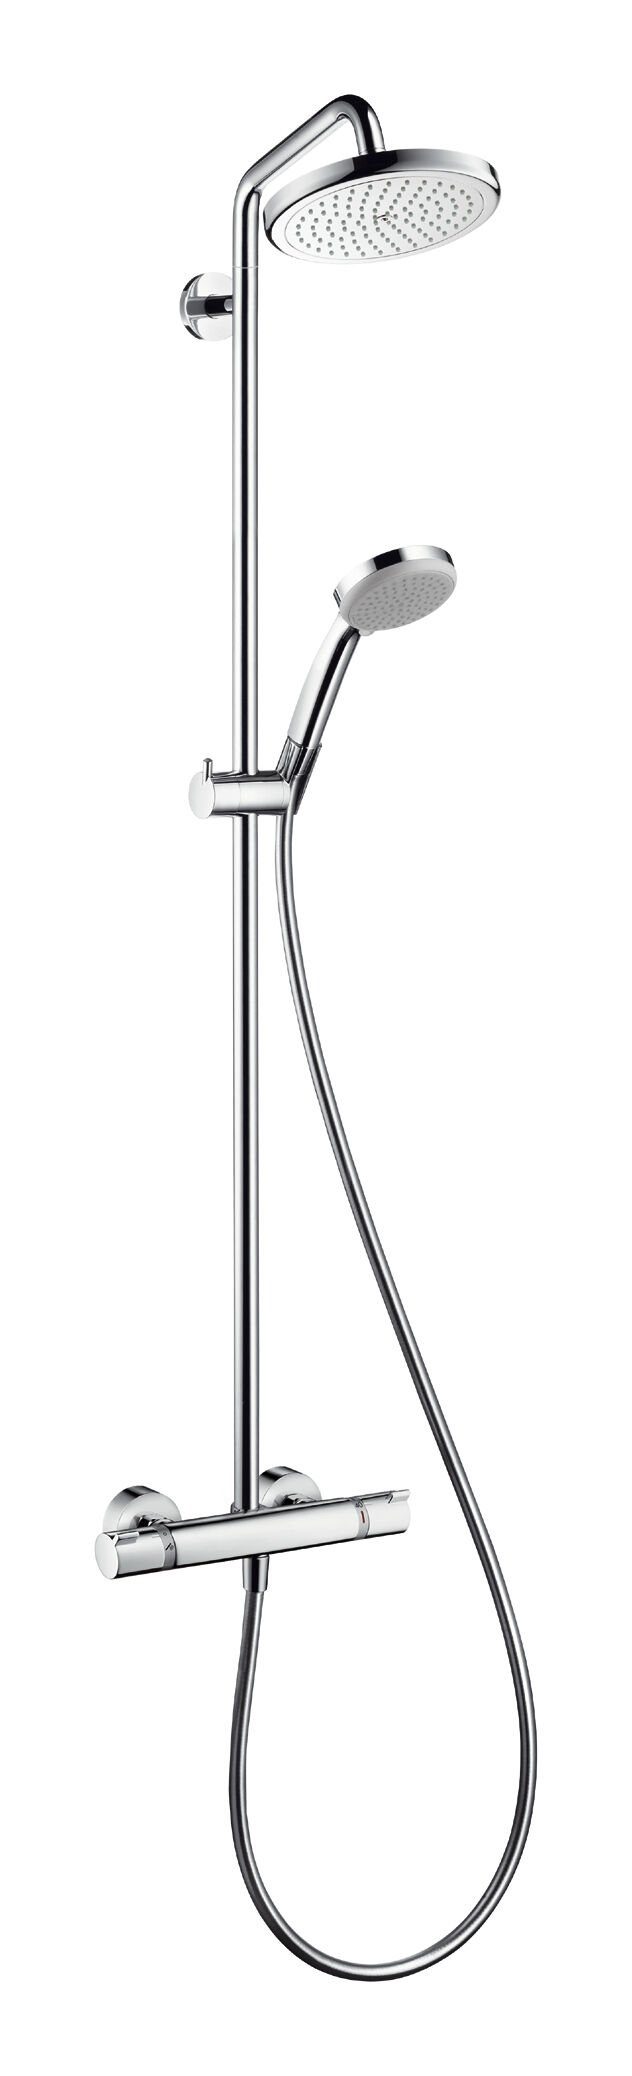 hansgrohe Duschsystem Croma Showerpipe, Höhe 121.3 cm, 220 1jet mit Thermostat - Chrom